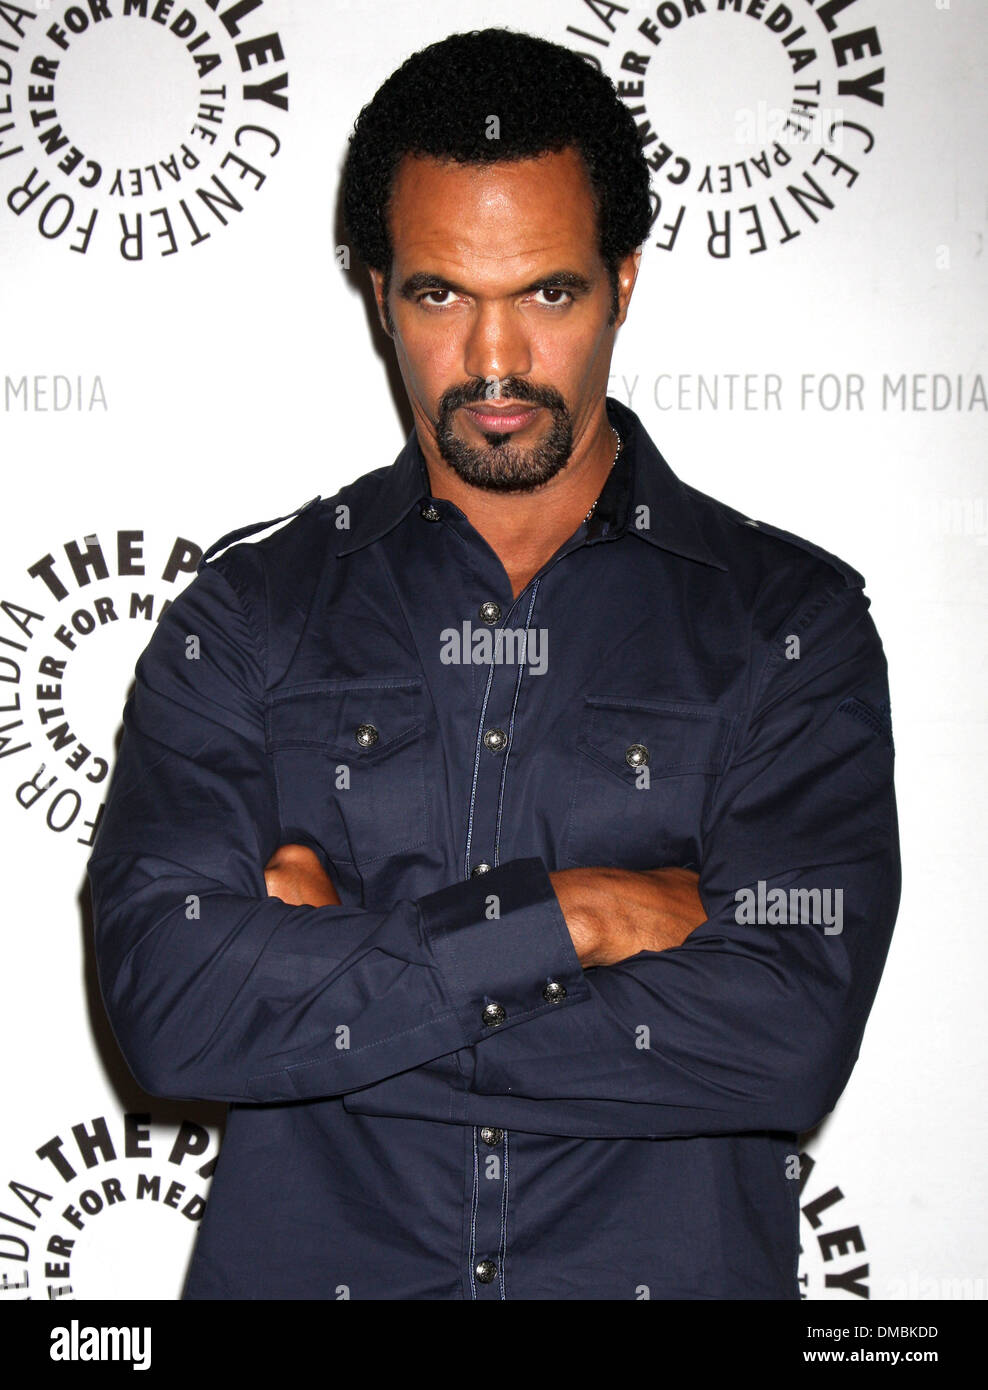 Kristoff St John 'The Young & Restless' celebrate 10,000 episodes at Paley Center for Media Los Angeles California - 23.07.12 Stock Photo